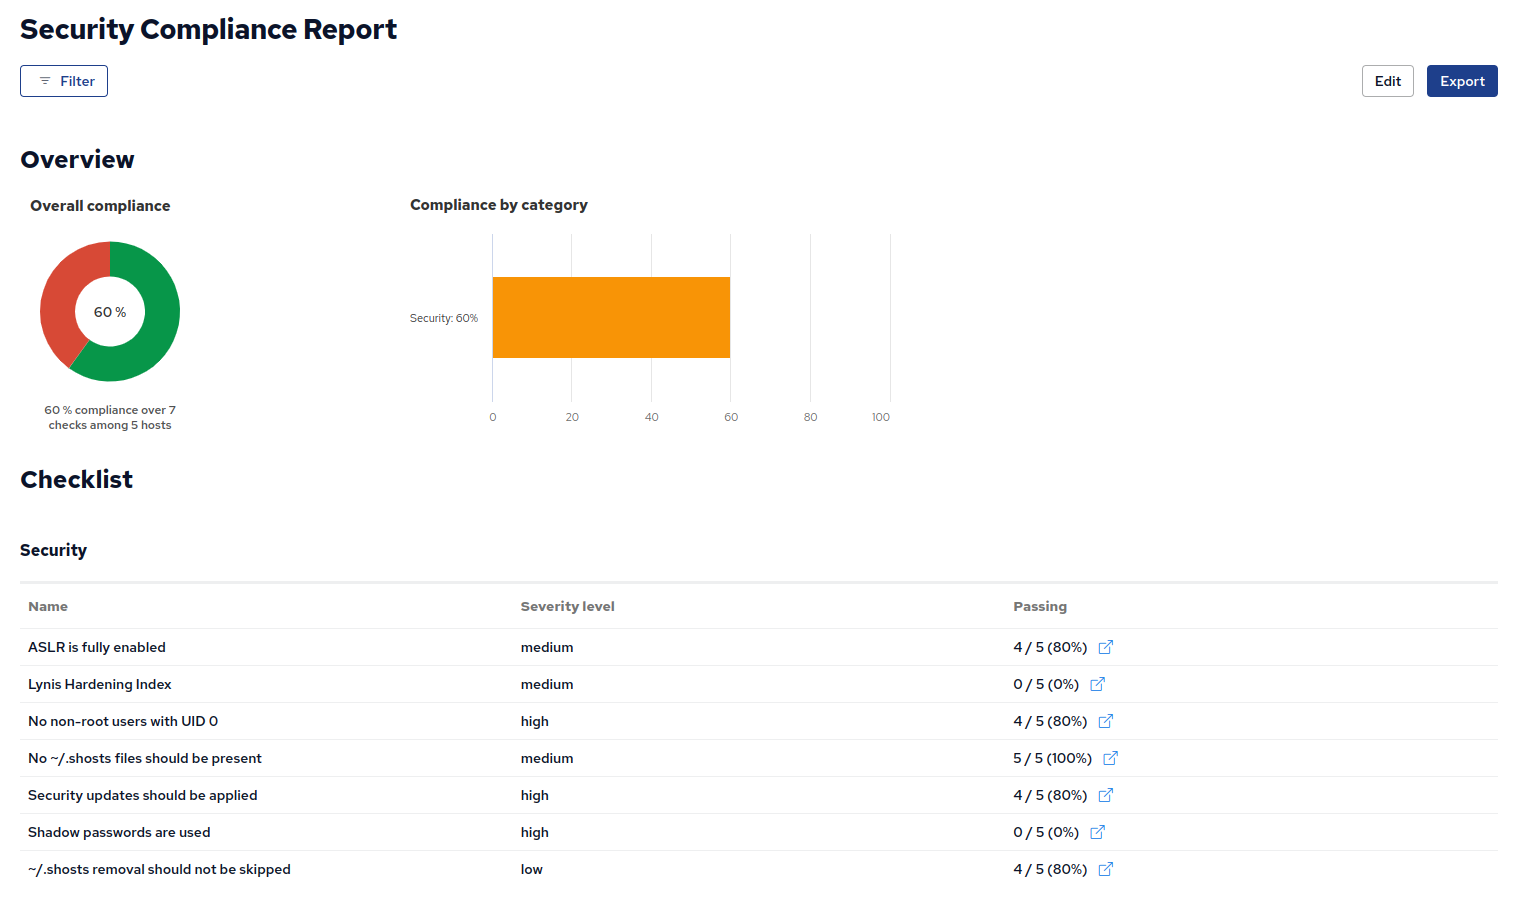 Resulting Security Compliance Report